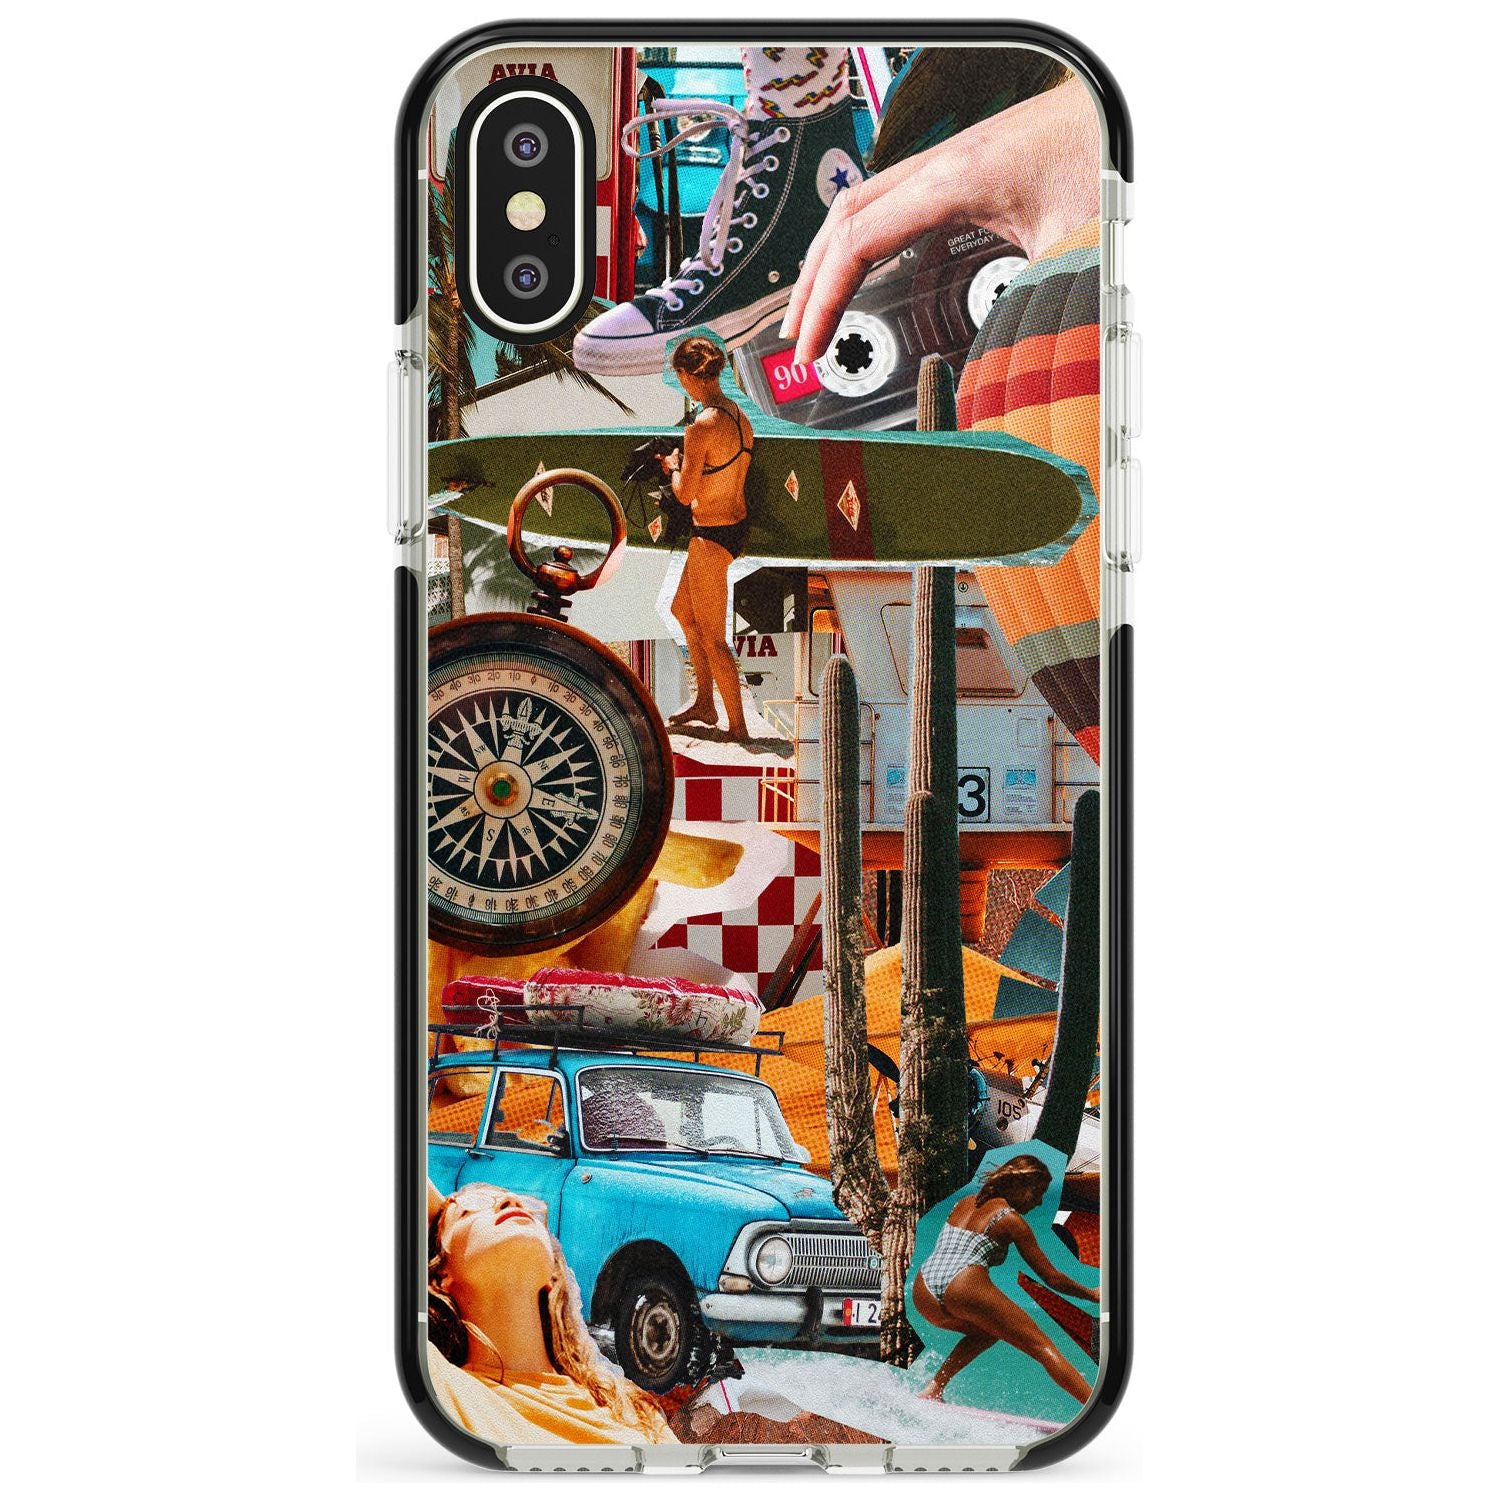 Vintage Collage: Road Trip Black Impact Phone Case for iPhone X XS Max XR